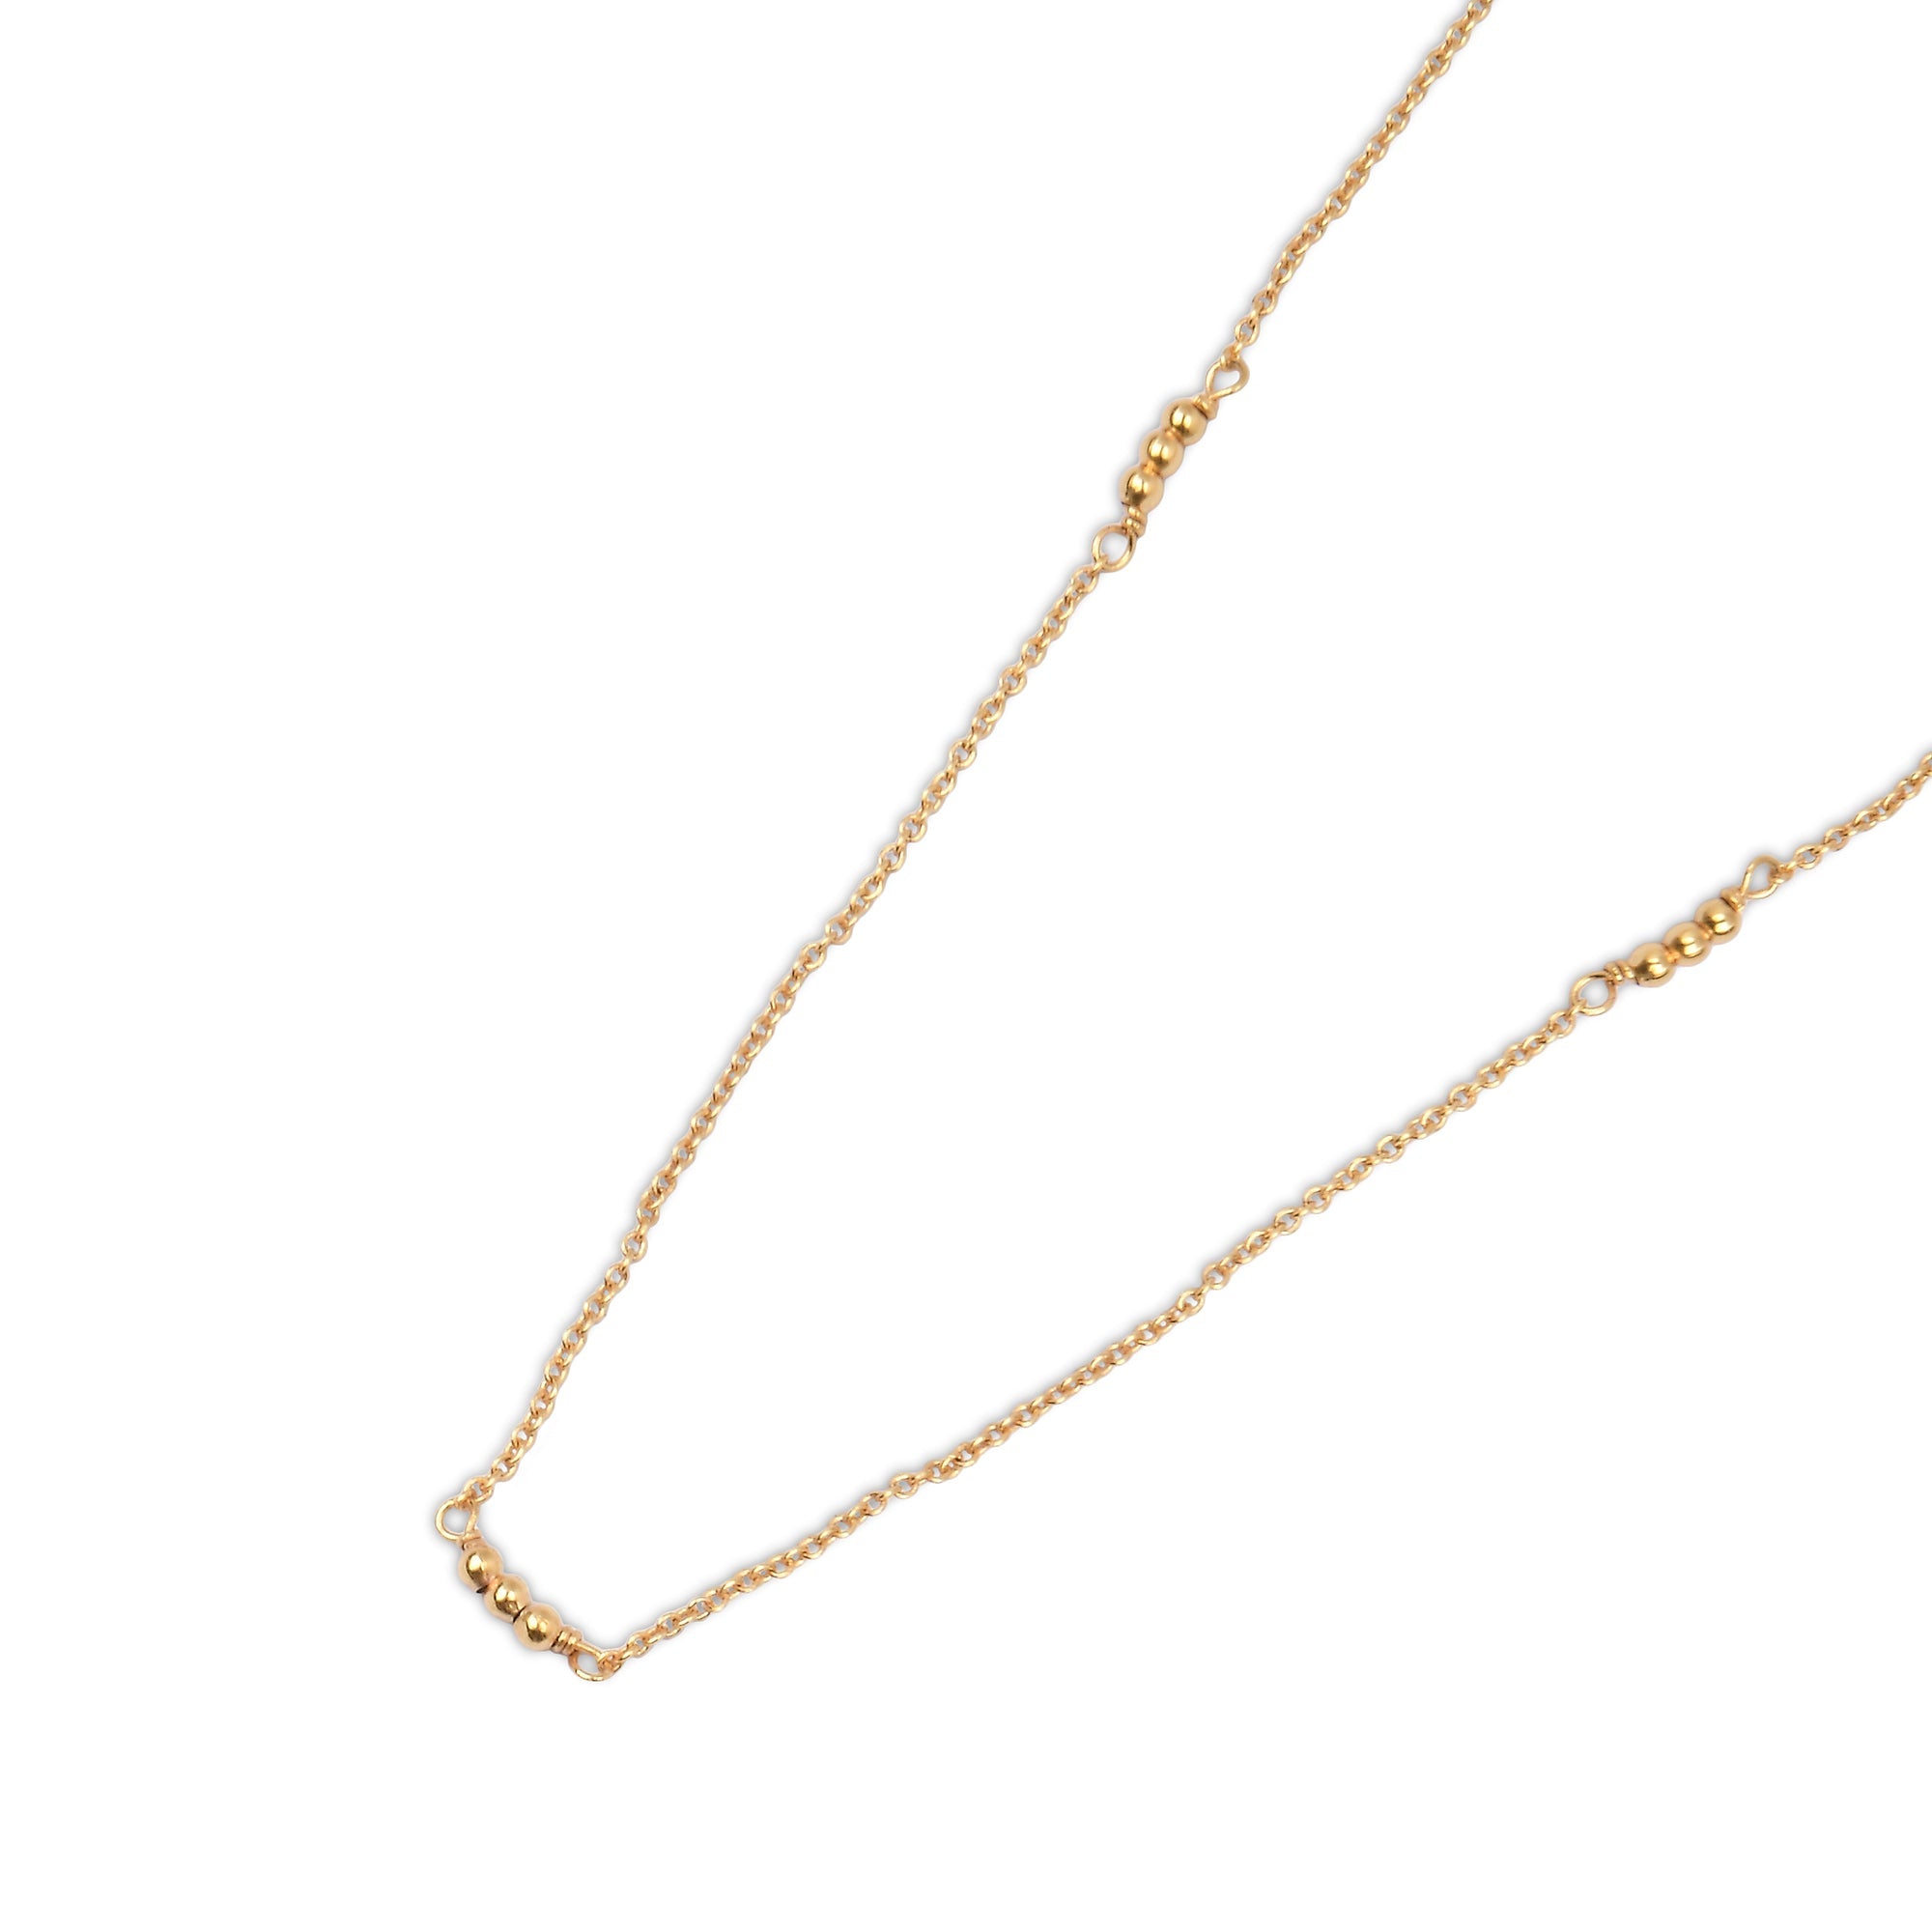 Real Gold Plated Z Bobble Long Chain Necklace